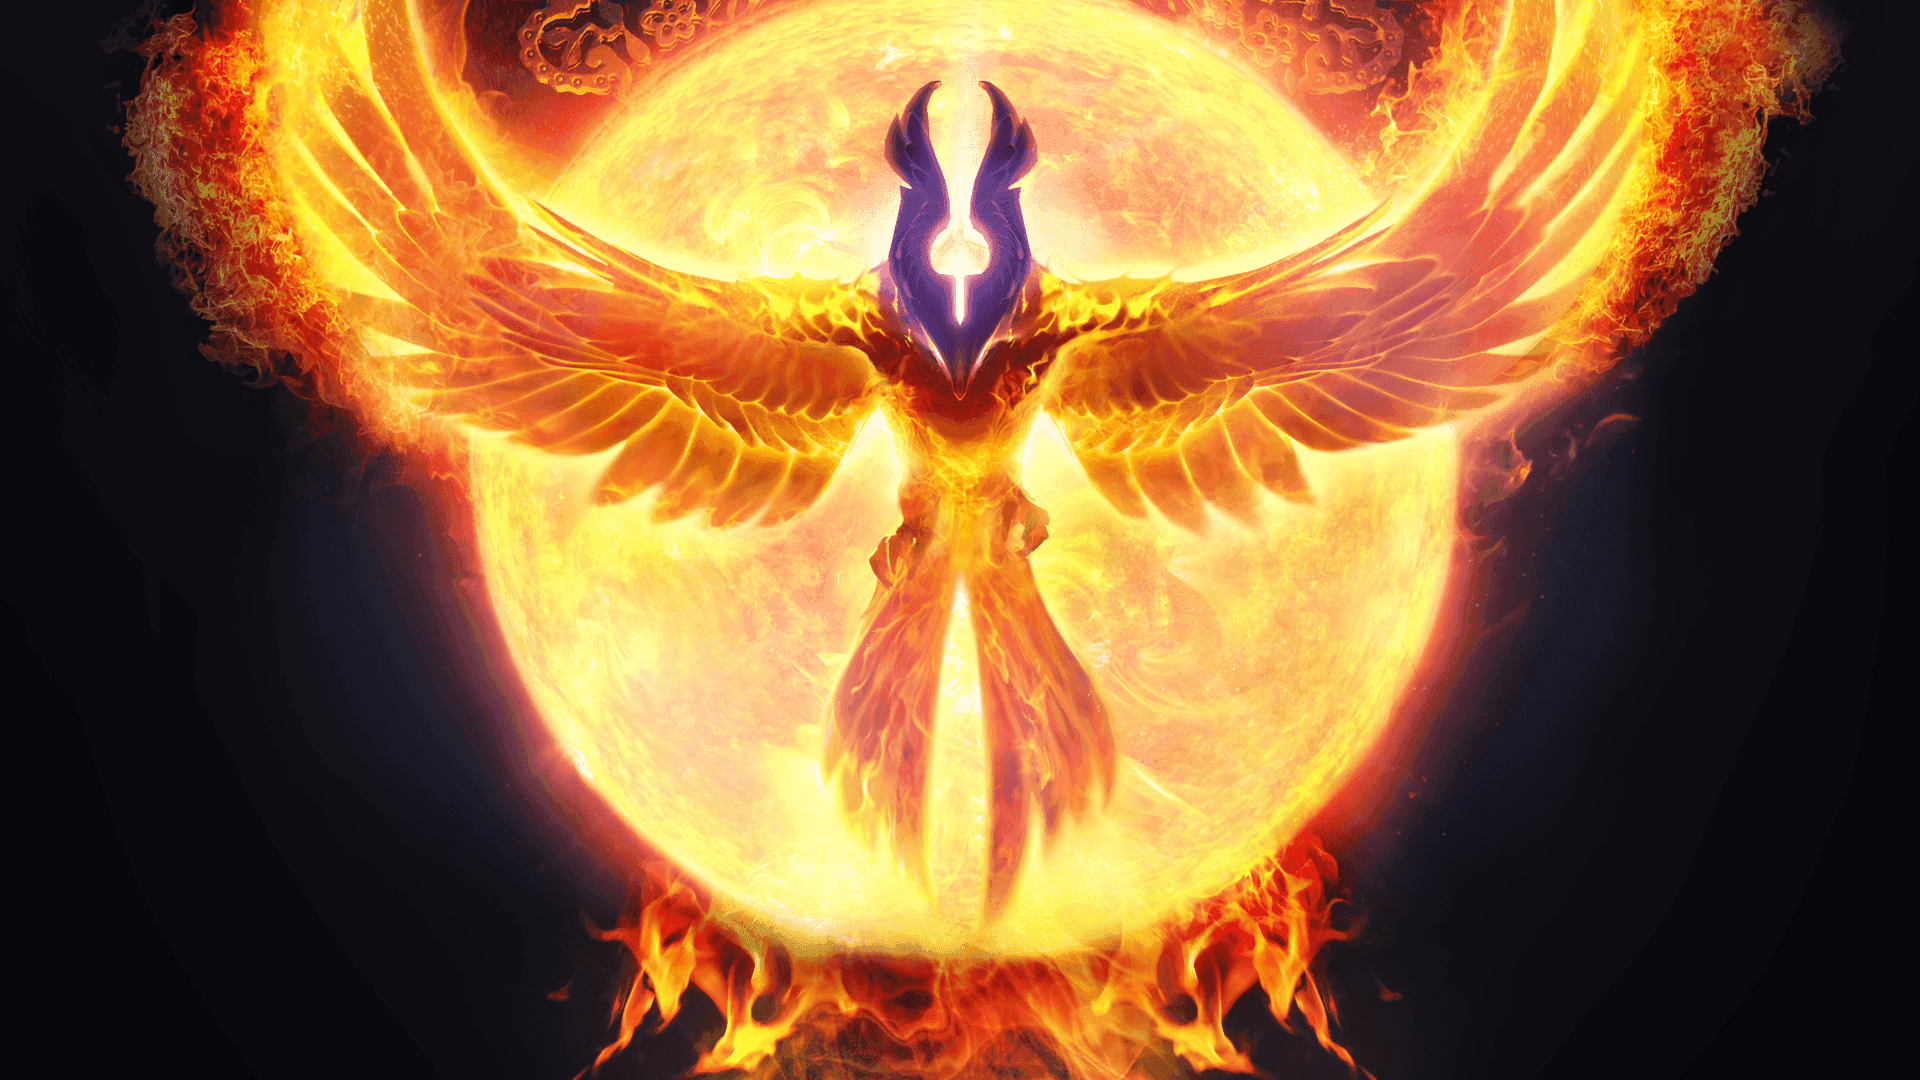 Majestic Phoenix Rising From The Flames